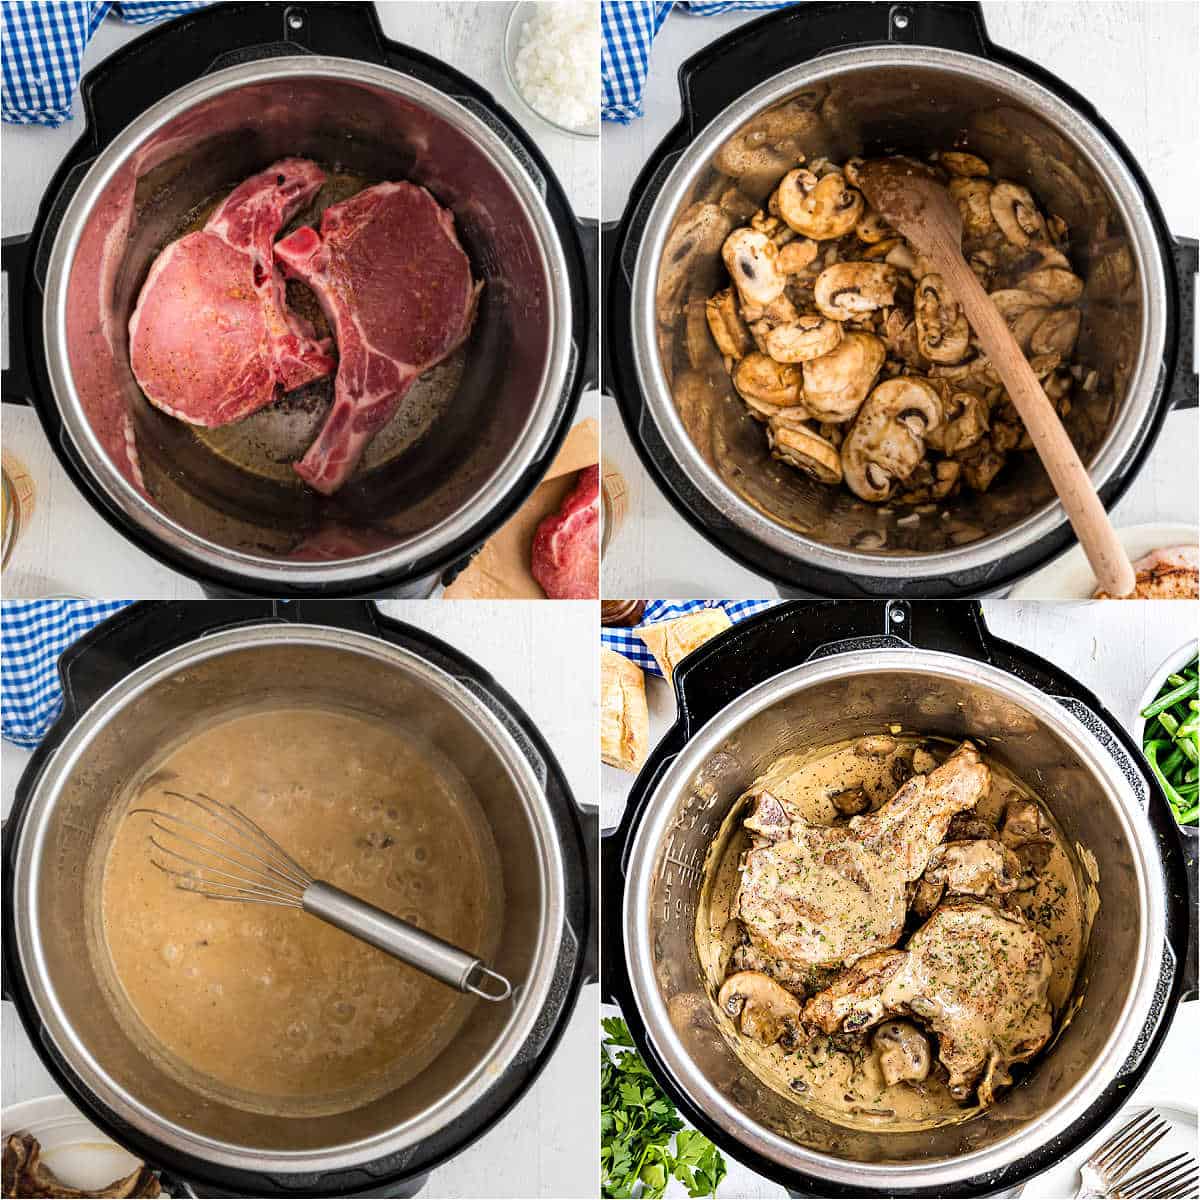 Step by step photos showing how to make pork chops in the pressure cooker.